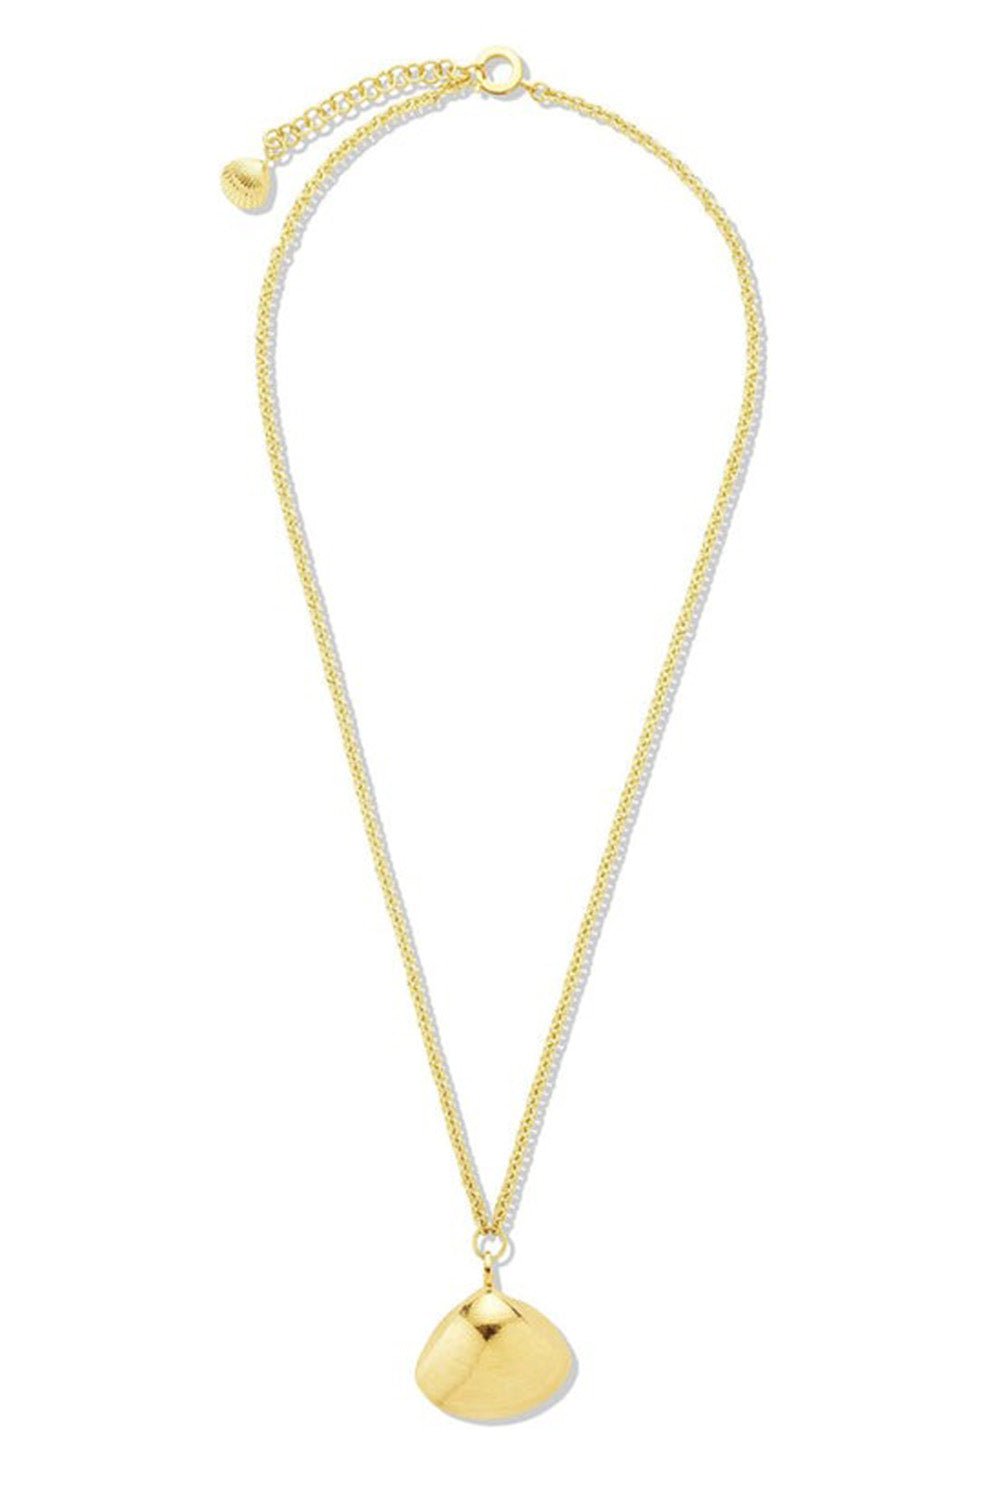 CADAR-Shell Charm Necklace-YELLOW GOLD